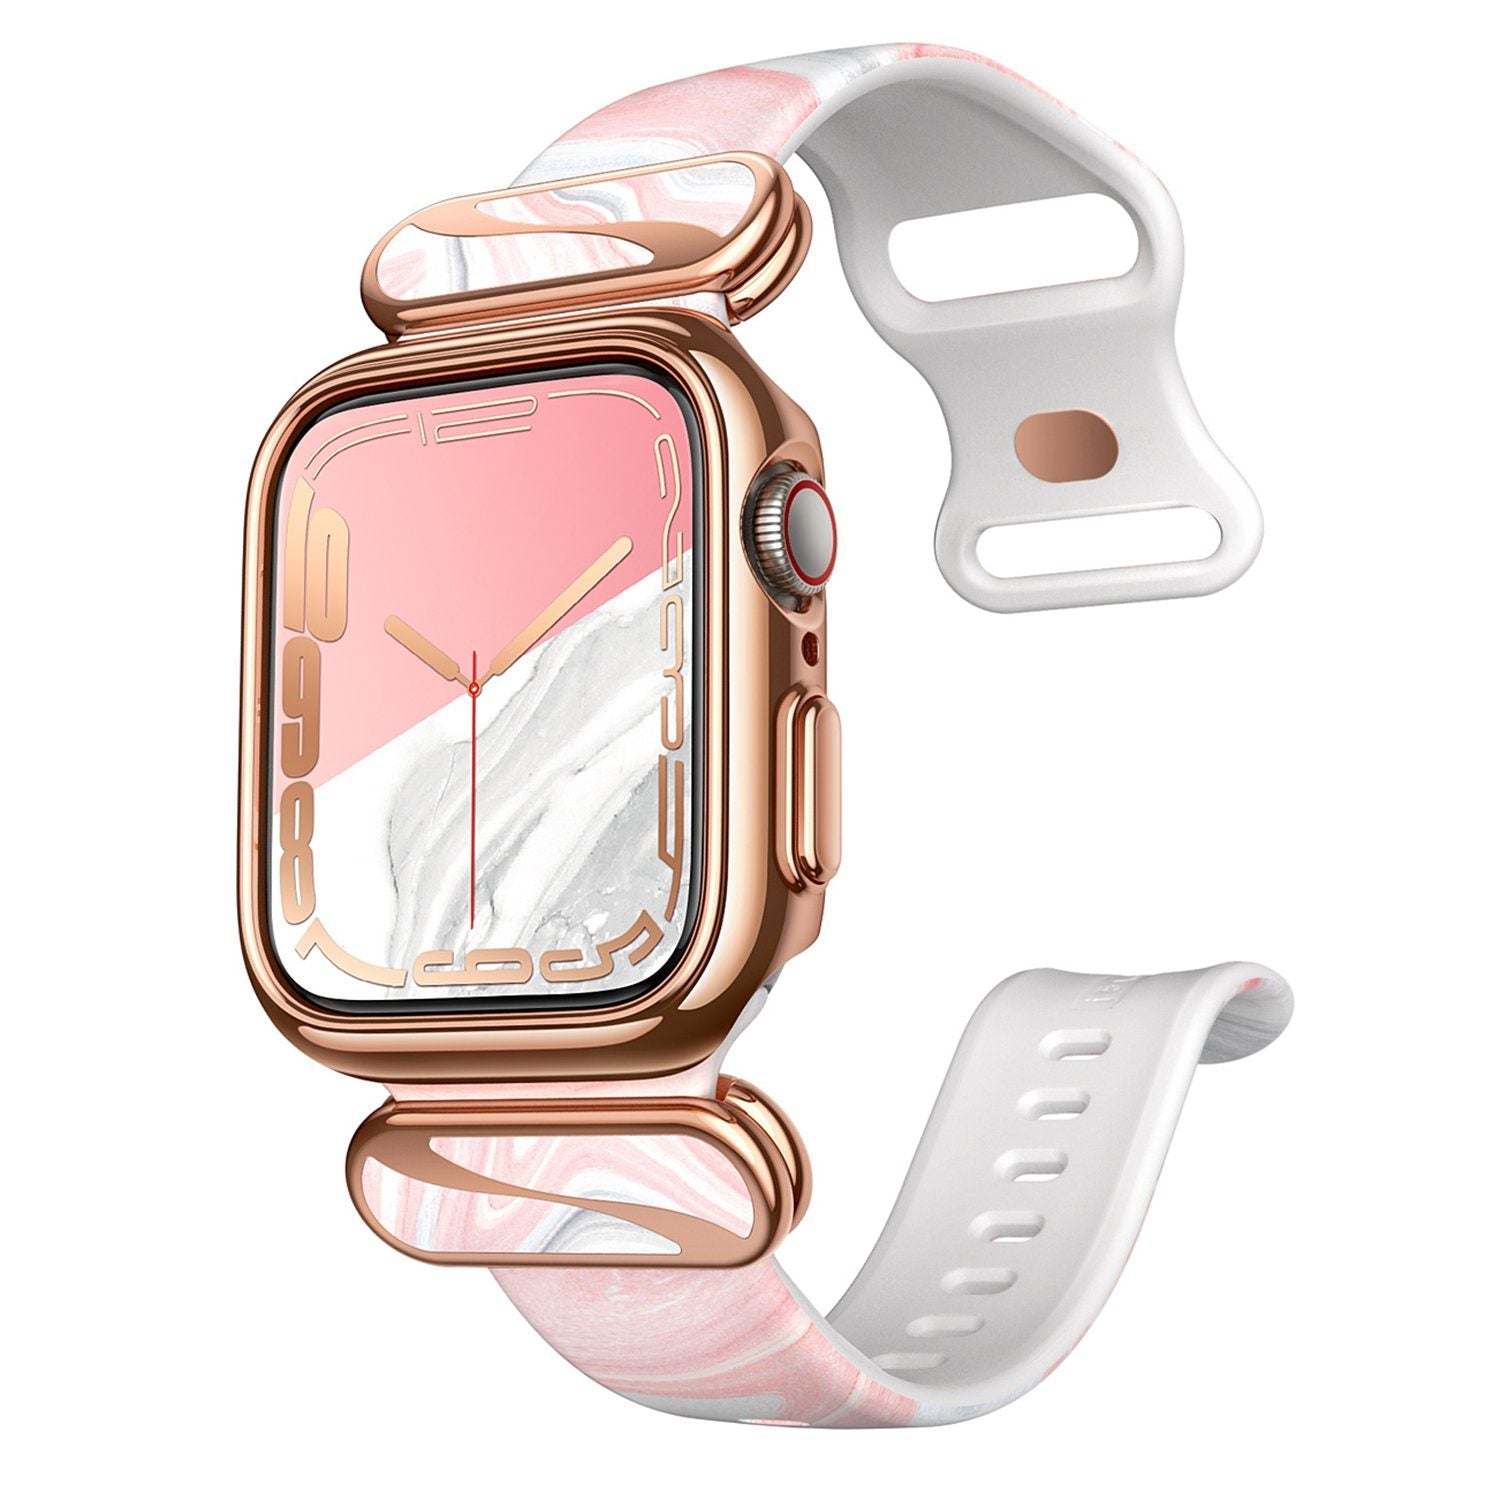 i-Blason Cosmo Stylish Sporty Protective Bumper Case with Adjustable Strap Bands for Apple Watch Series 7/6/SE/5/4 (40mm/41mm) Default i-Blason Marble 